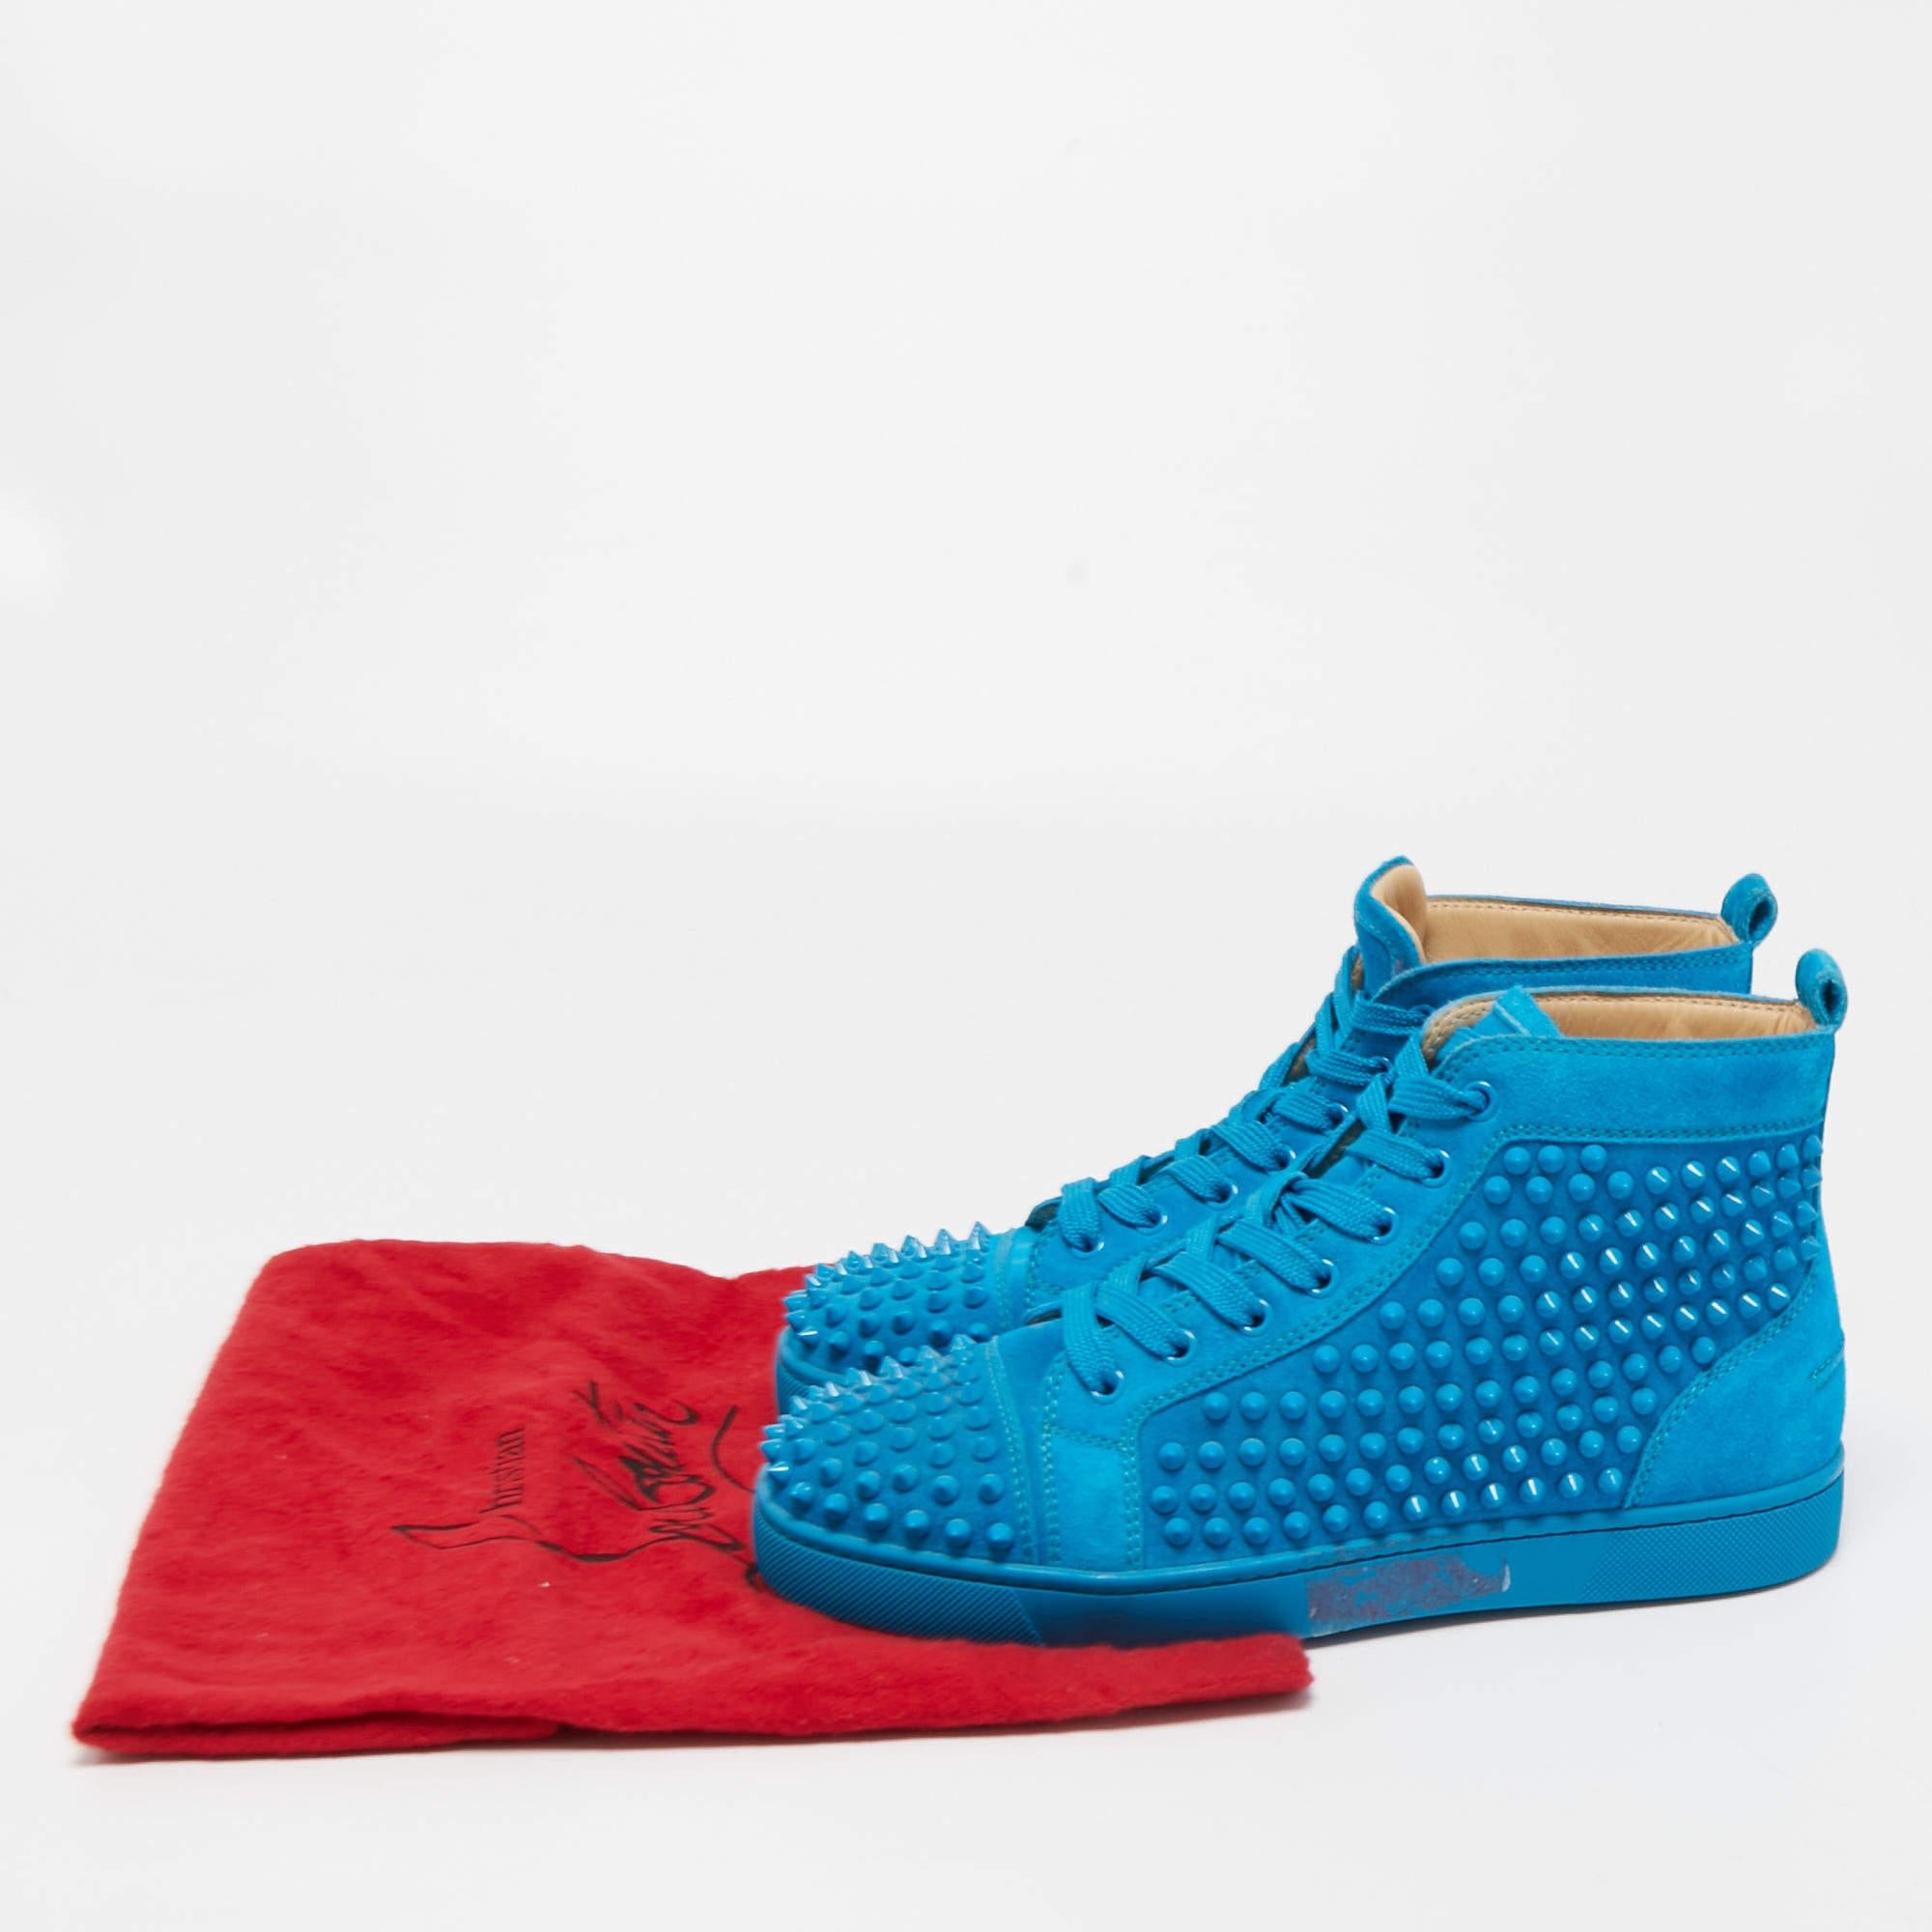 Christian Louboutin Blue Suede Louis Spike High Top Sneakers Size 39.5 4